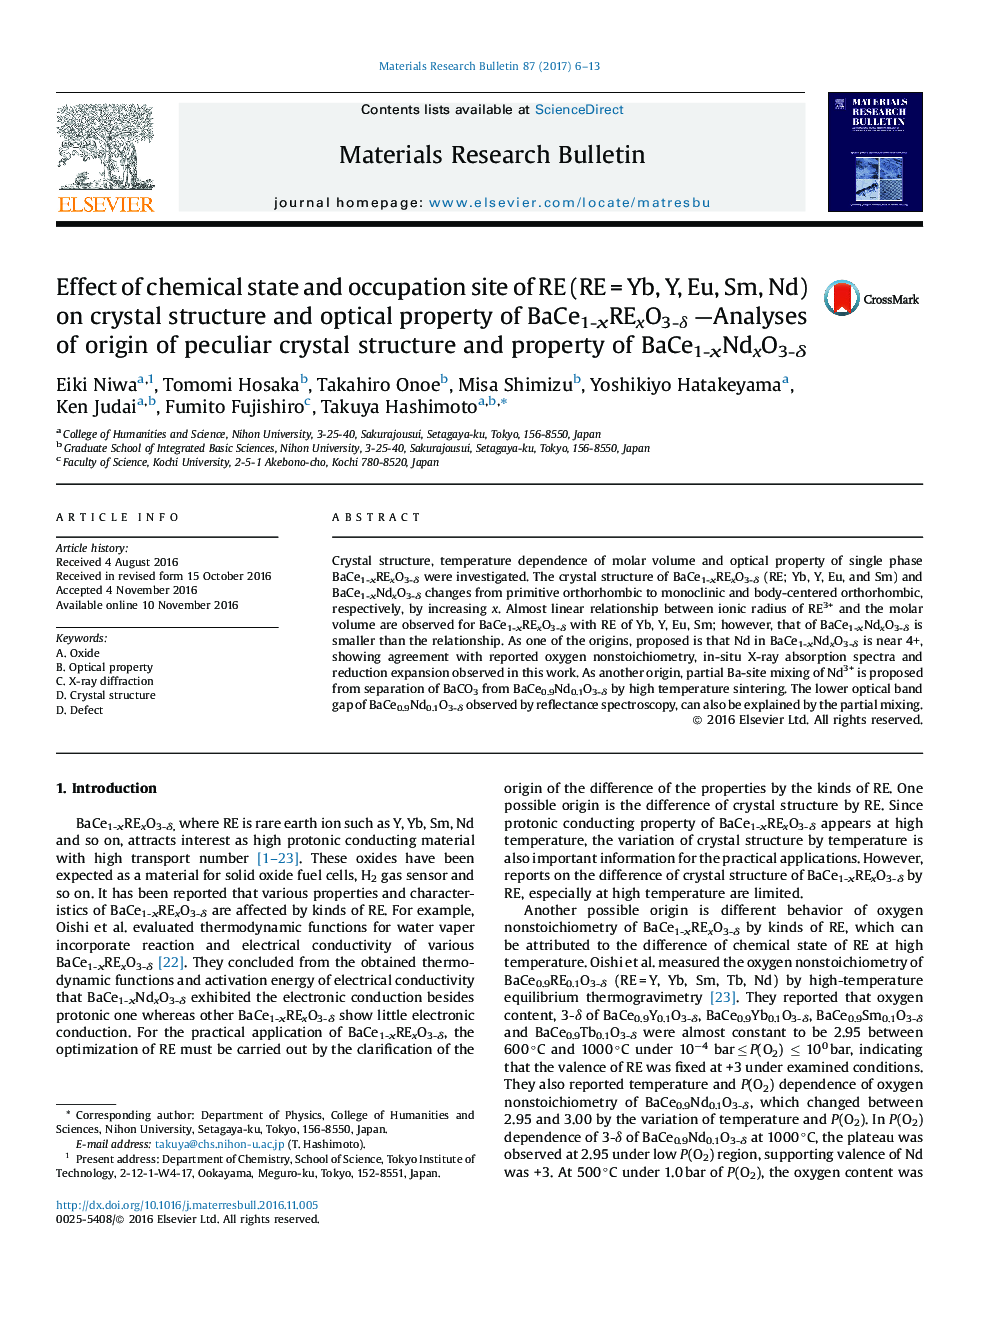 Effect of chemical state and occupation site of RE (REÂ =Â Yb, Y, Eu, Sm, Nd) on crystal structure and optical property of BaCe1-xRExO3-Î´ -Analyses of origin of peculiar crystal structure and property of BaCe1-xNdxO3-Î´